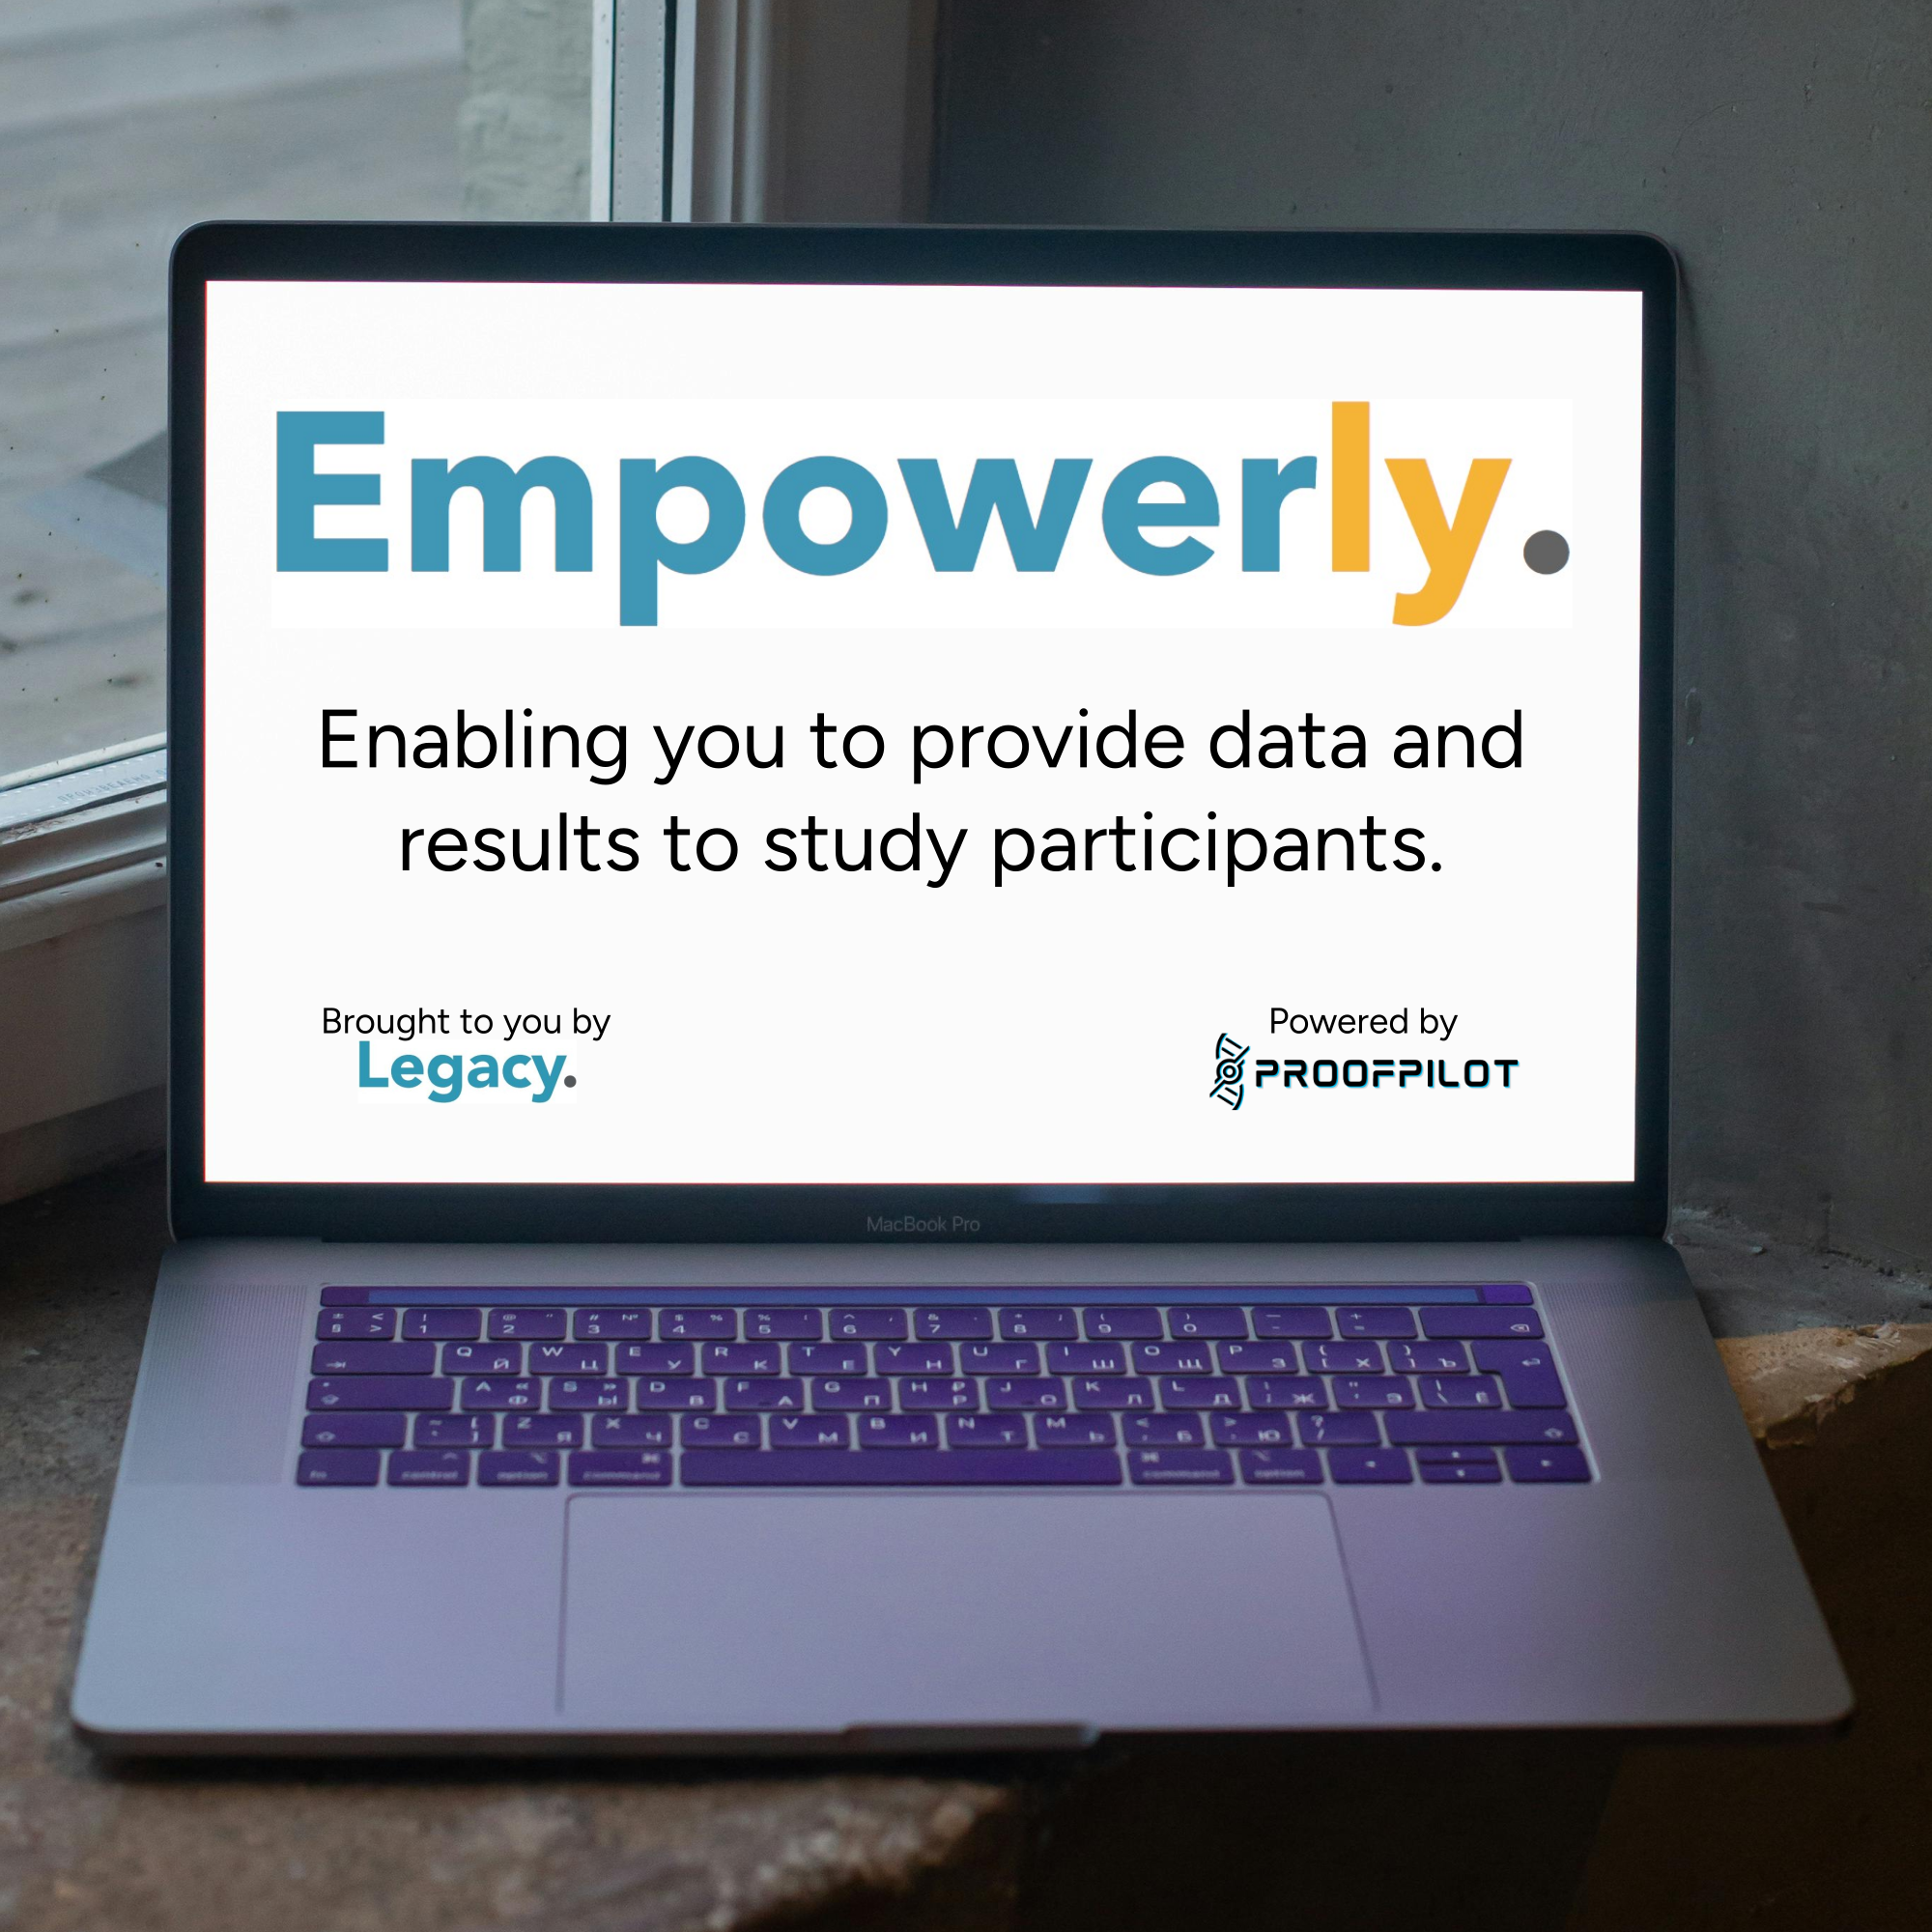 An open laptop sitting on a wooden table. The screen shows the logo for Empowerly followed by the text "Enabling you to provide data and results to study participants. Brought to you by Legacy Powered by ProofPilot." The company names are their respective logos.